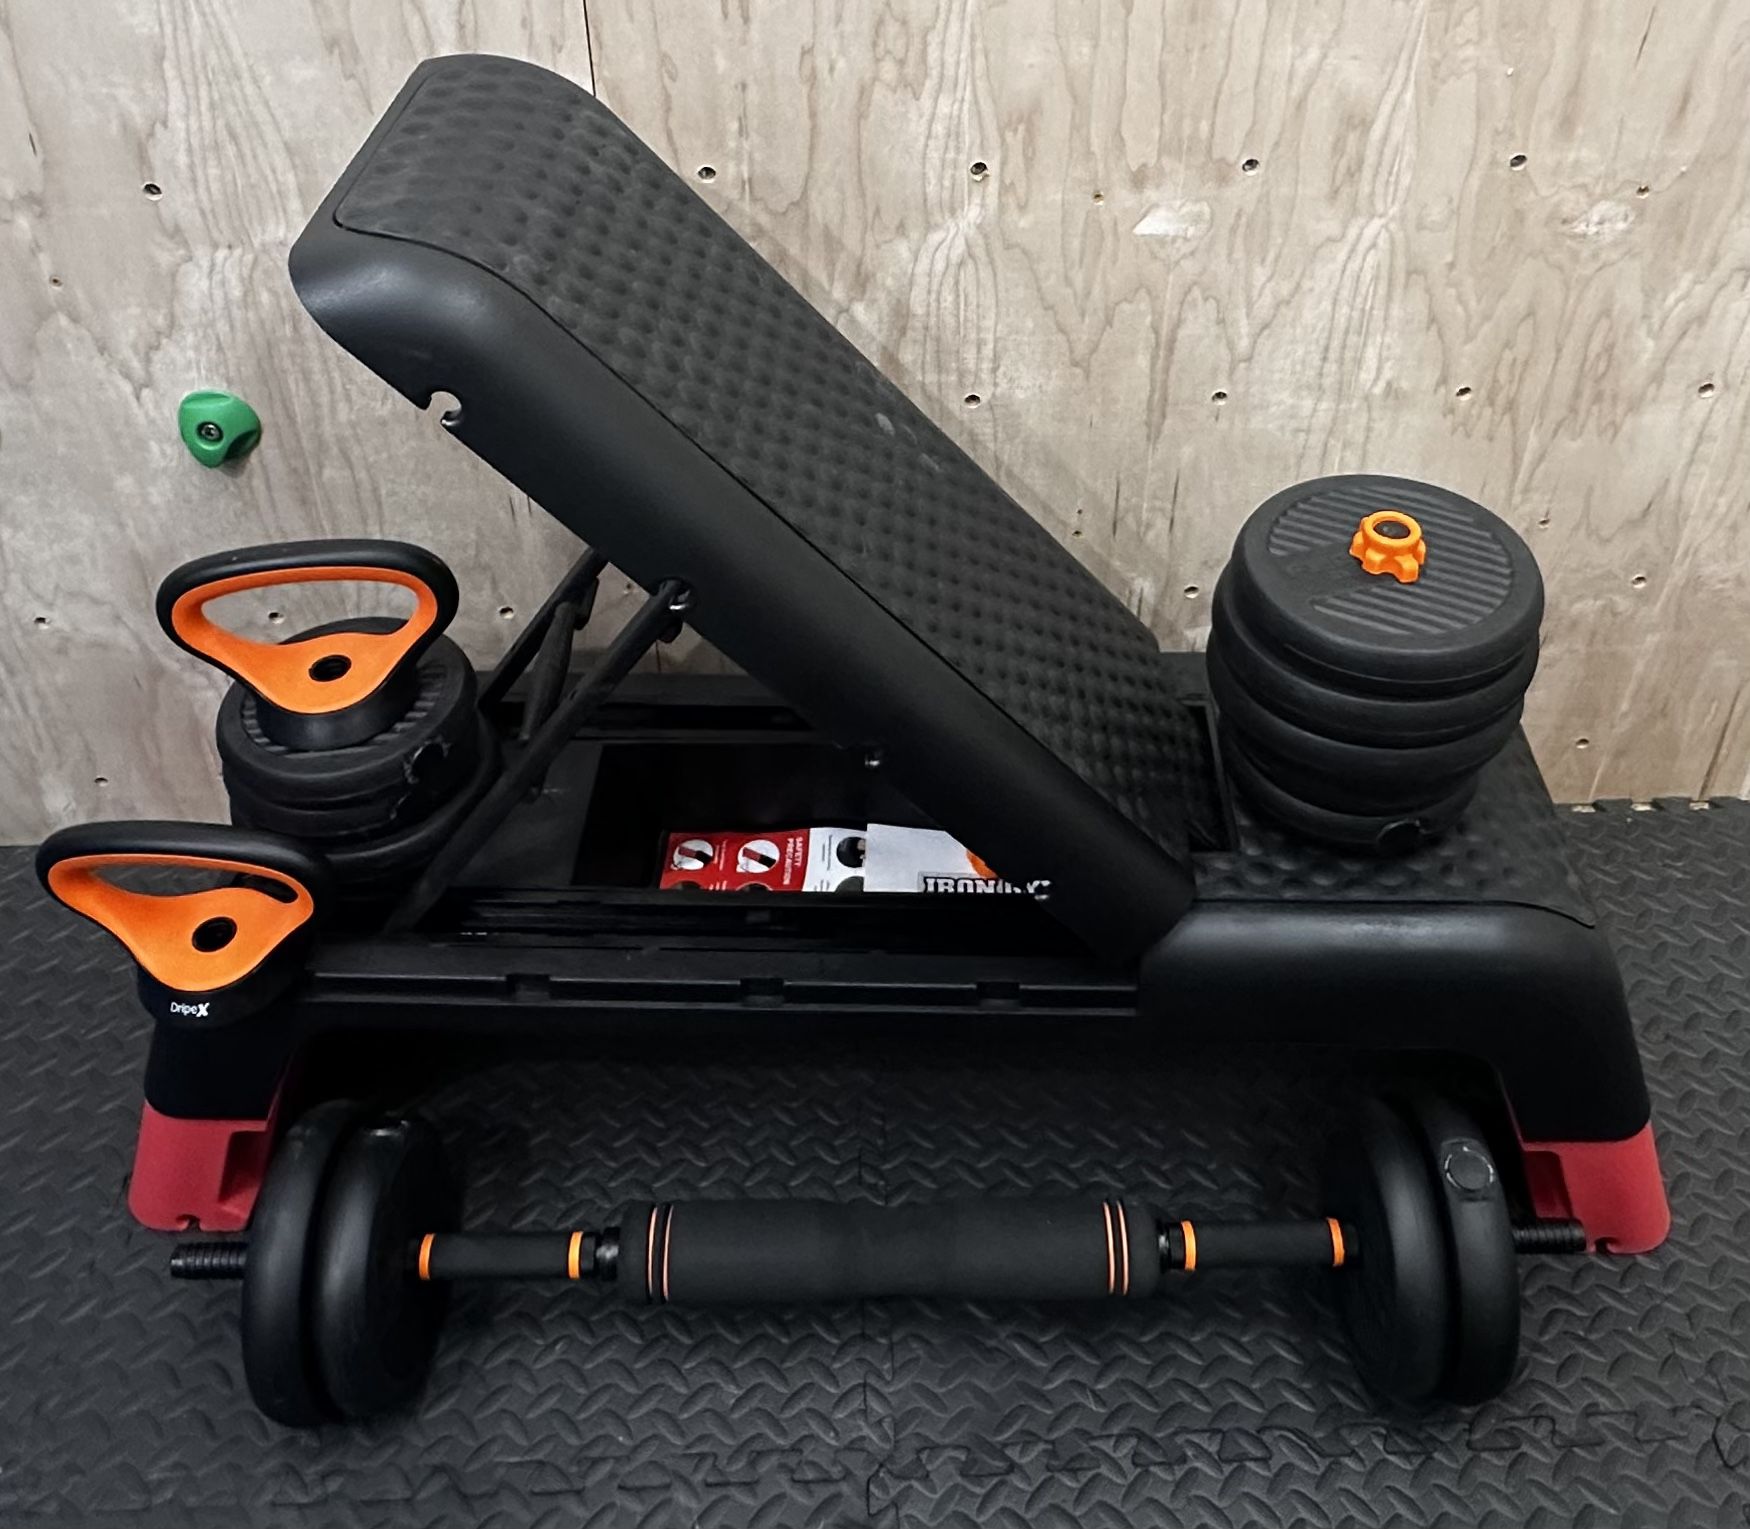 Weight Bench and Dumbbell/Kettle Bell/Barbell Combination Set